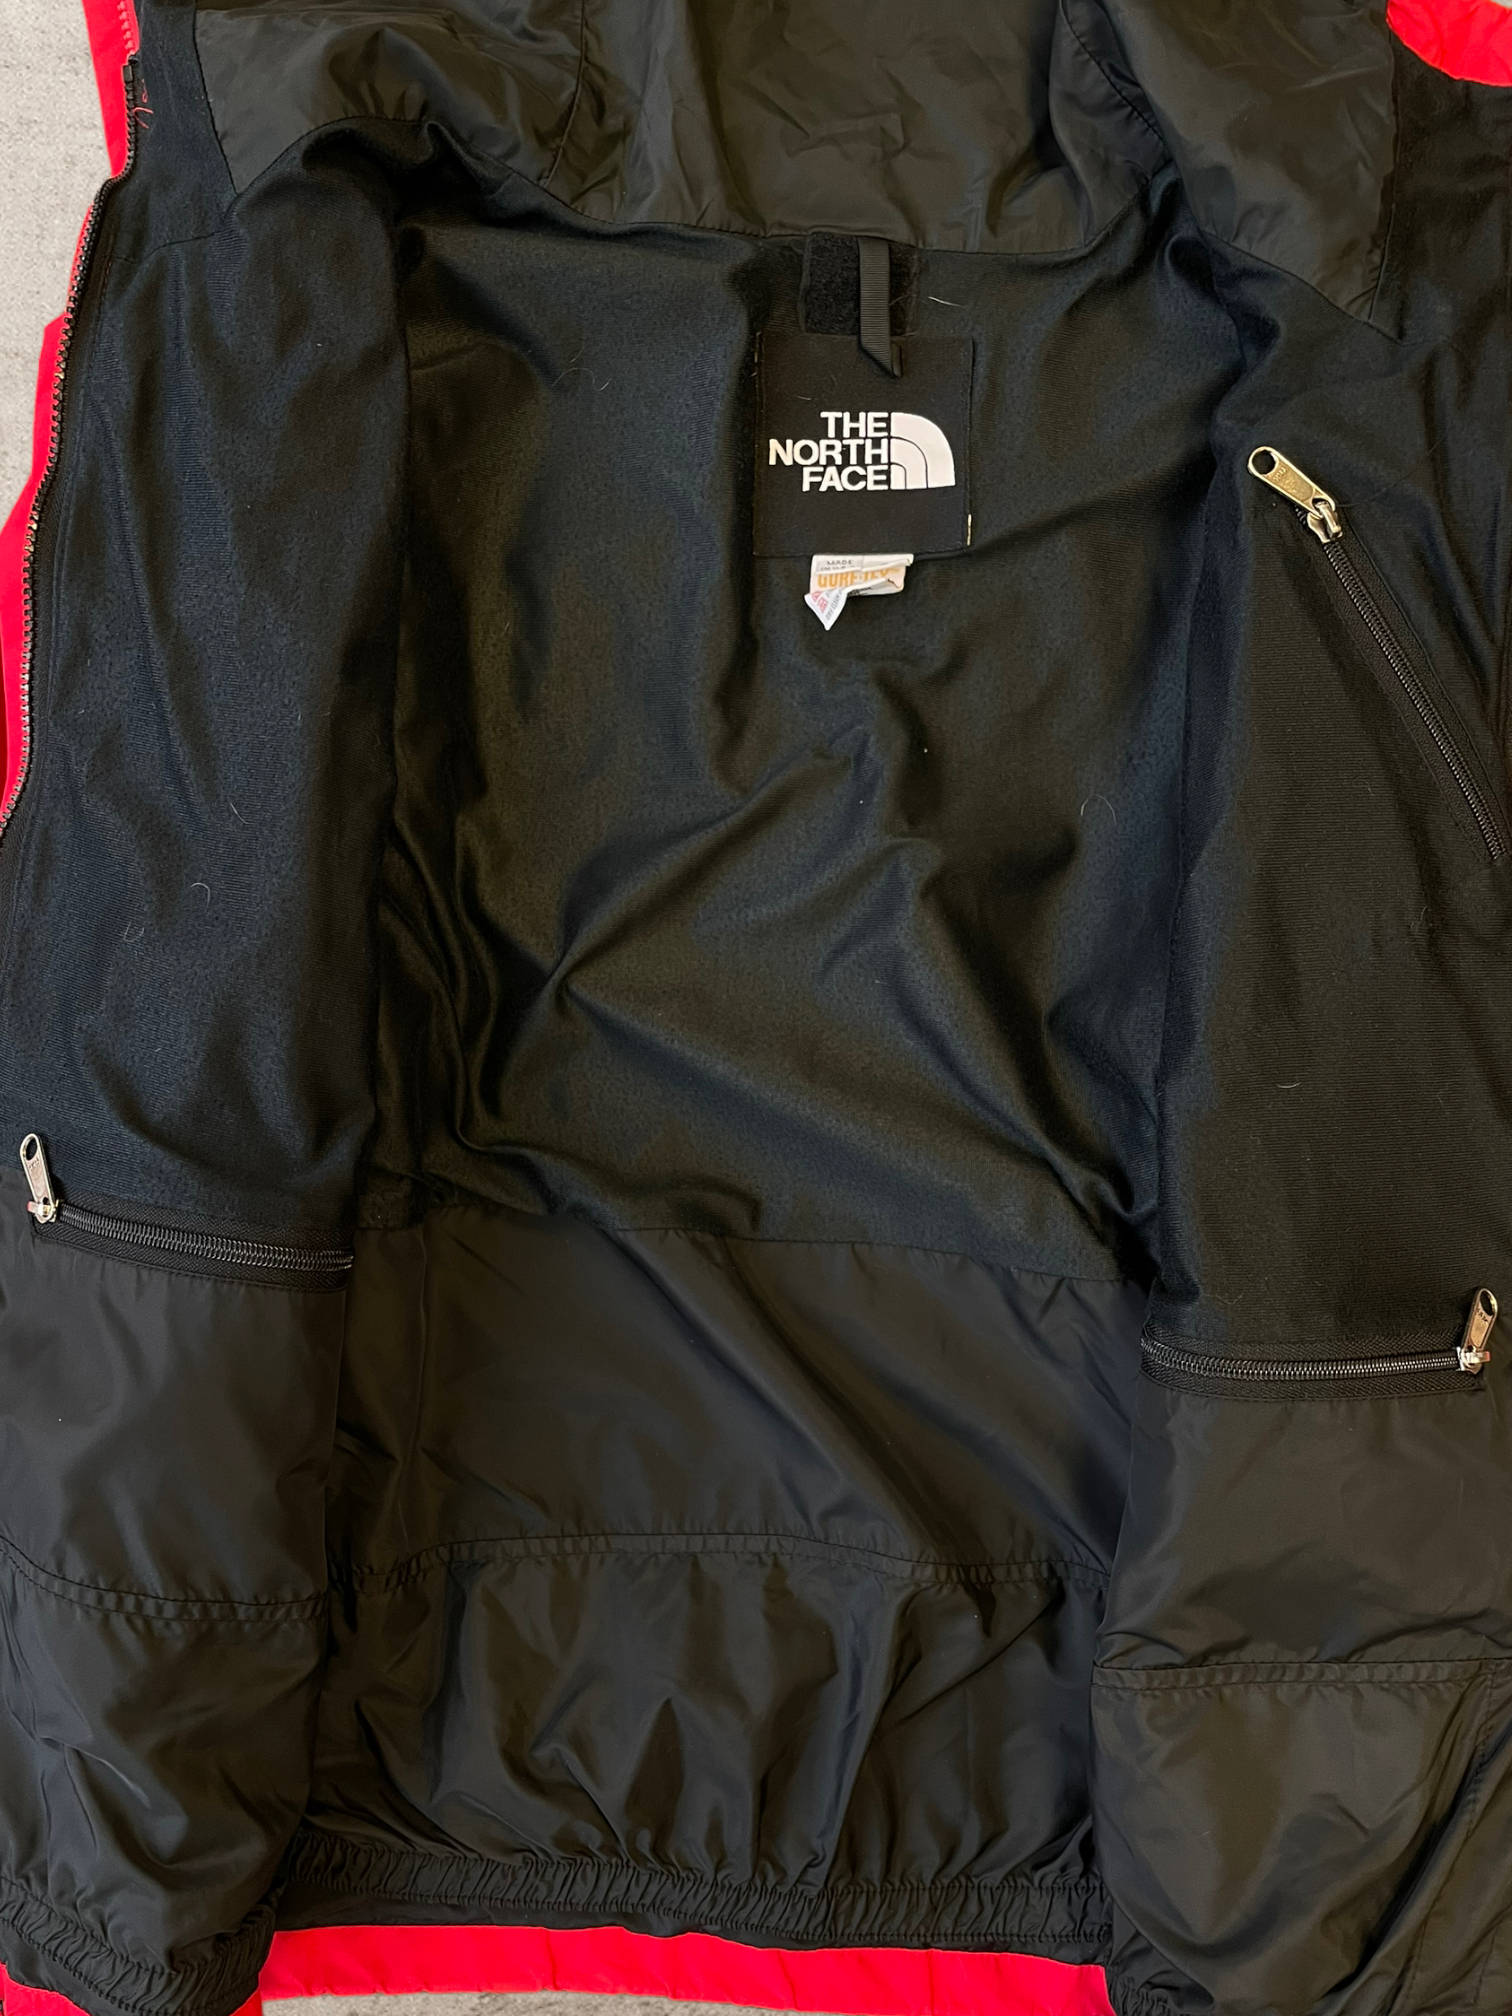 90s North Face Gore-Tex Mountain Jacket - Large/X-Large